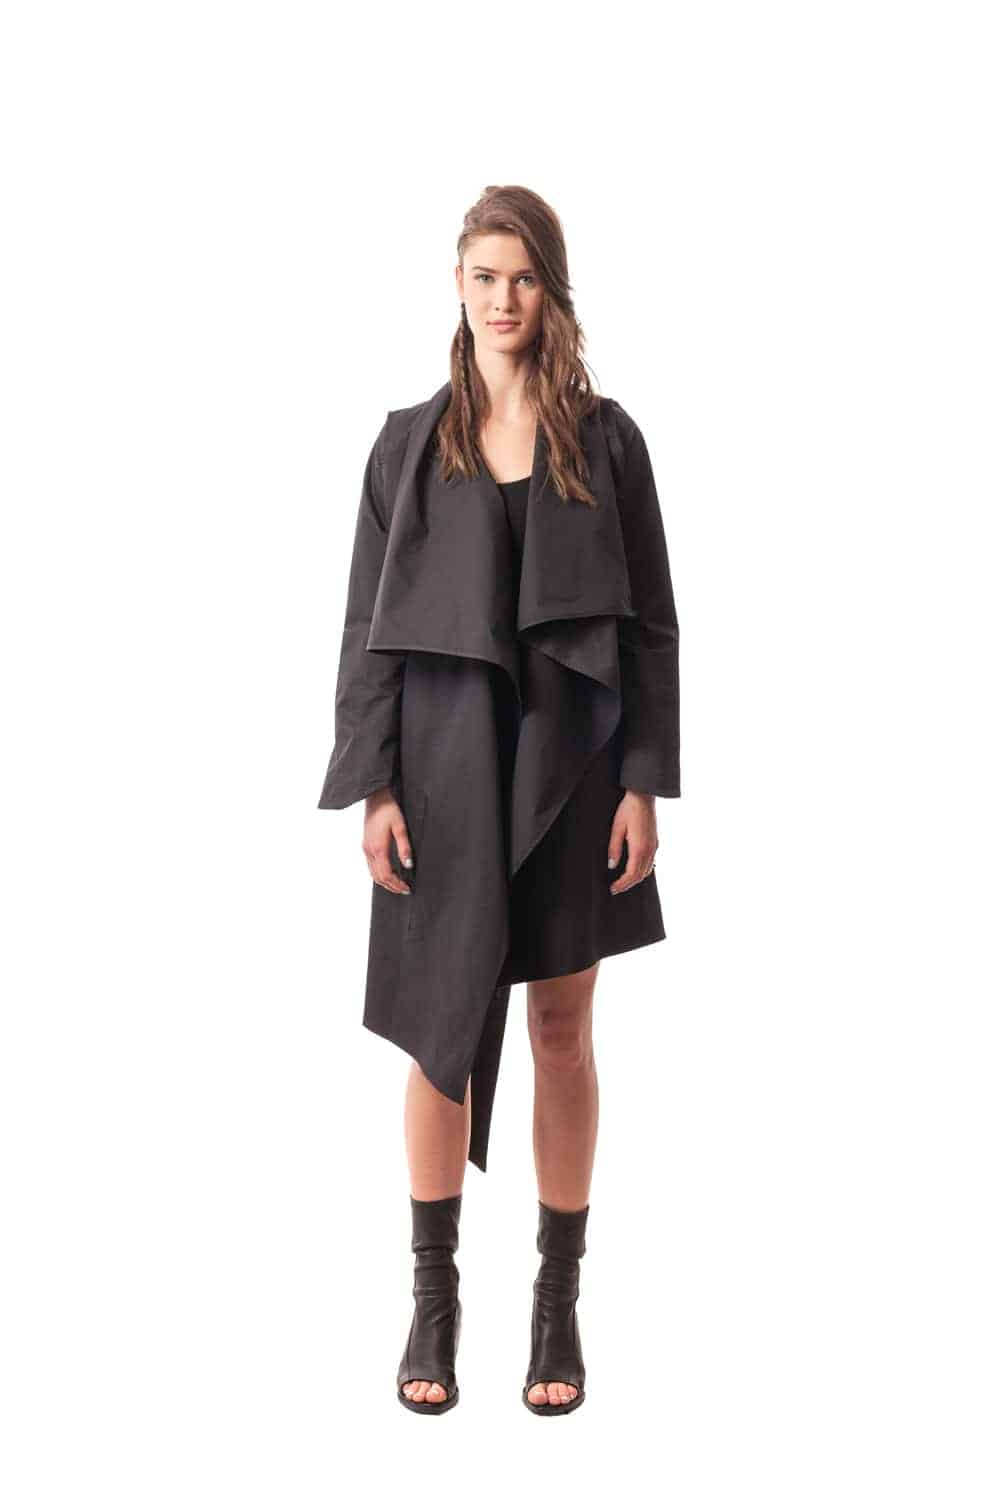 Black Villa Cimbrone Convertible Trench Jacket/Vest. A Japanese inspired convertible trench coat.